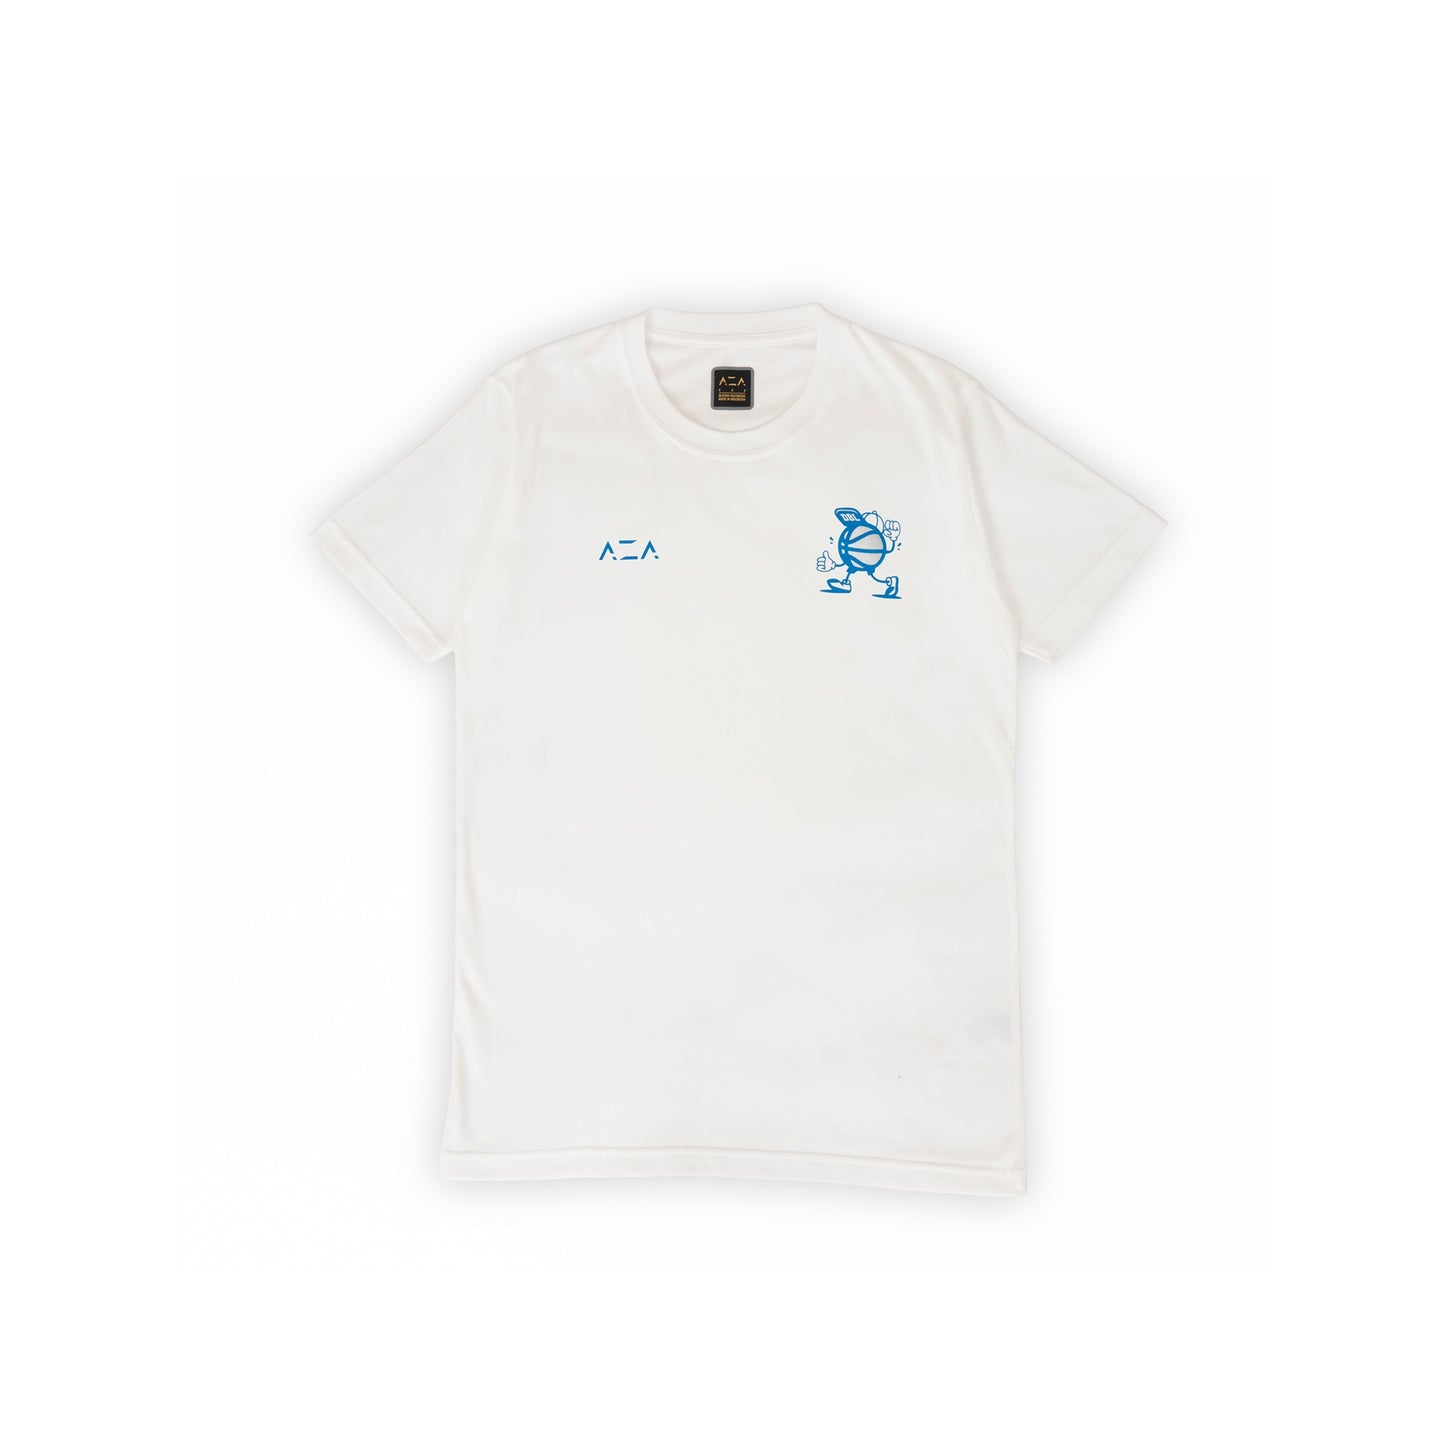 AZA x DBL Camp 24 Series T-Shirt Doodle Basketball - White